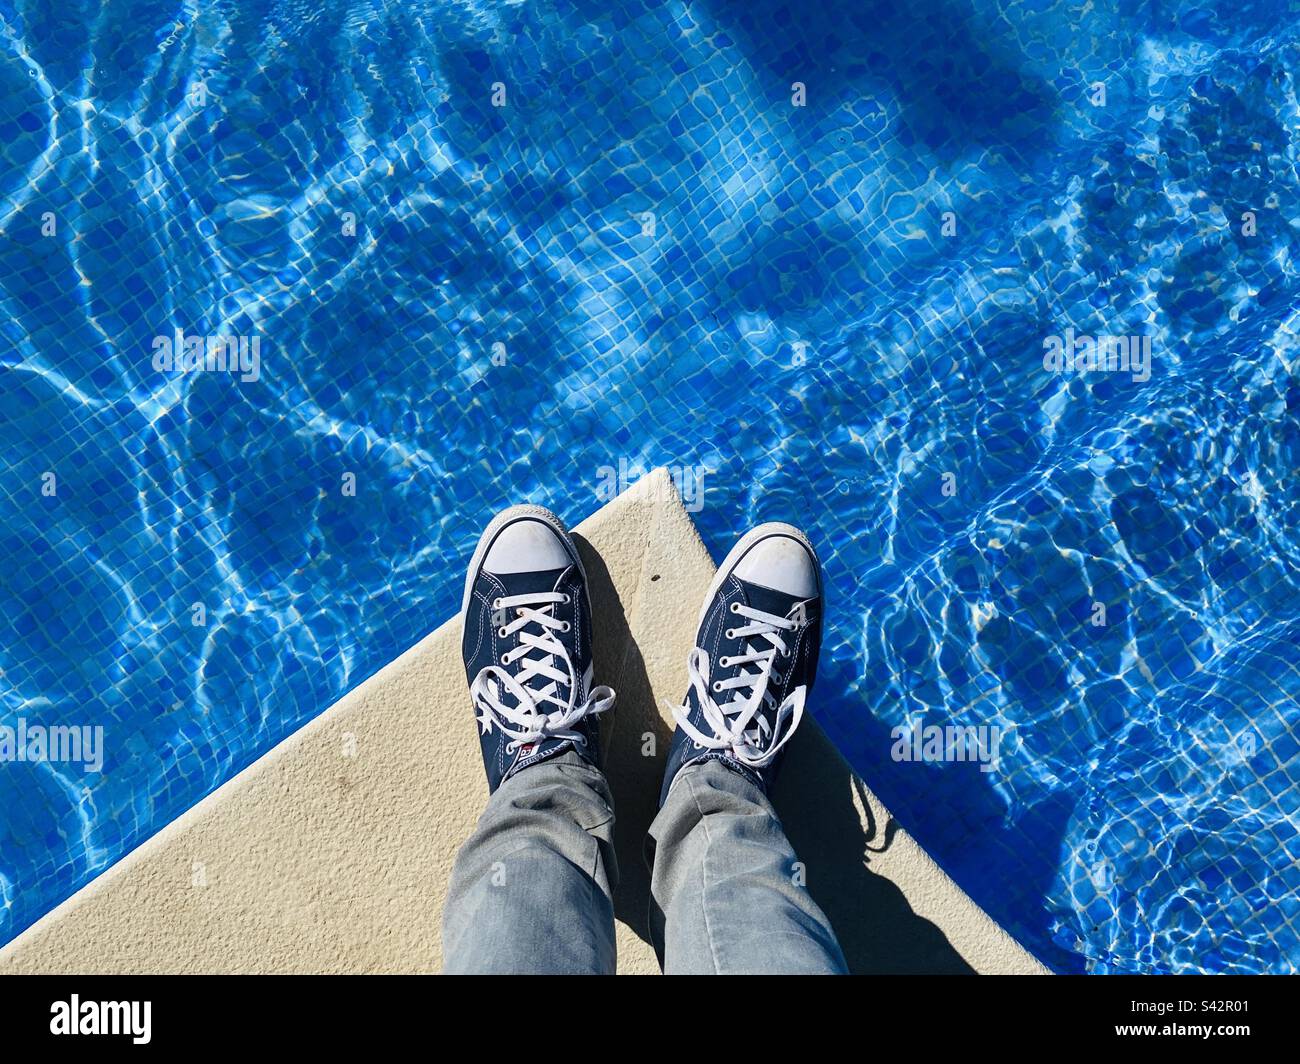 Lager Arkæolog læbe Looking down on feet wearing sneakers at the edge of a swimming pool Stock  Photo - Alamy